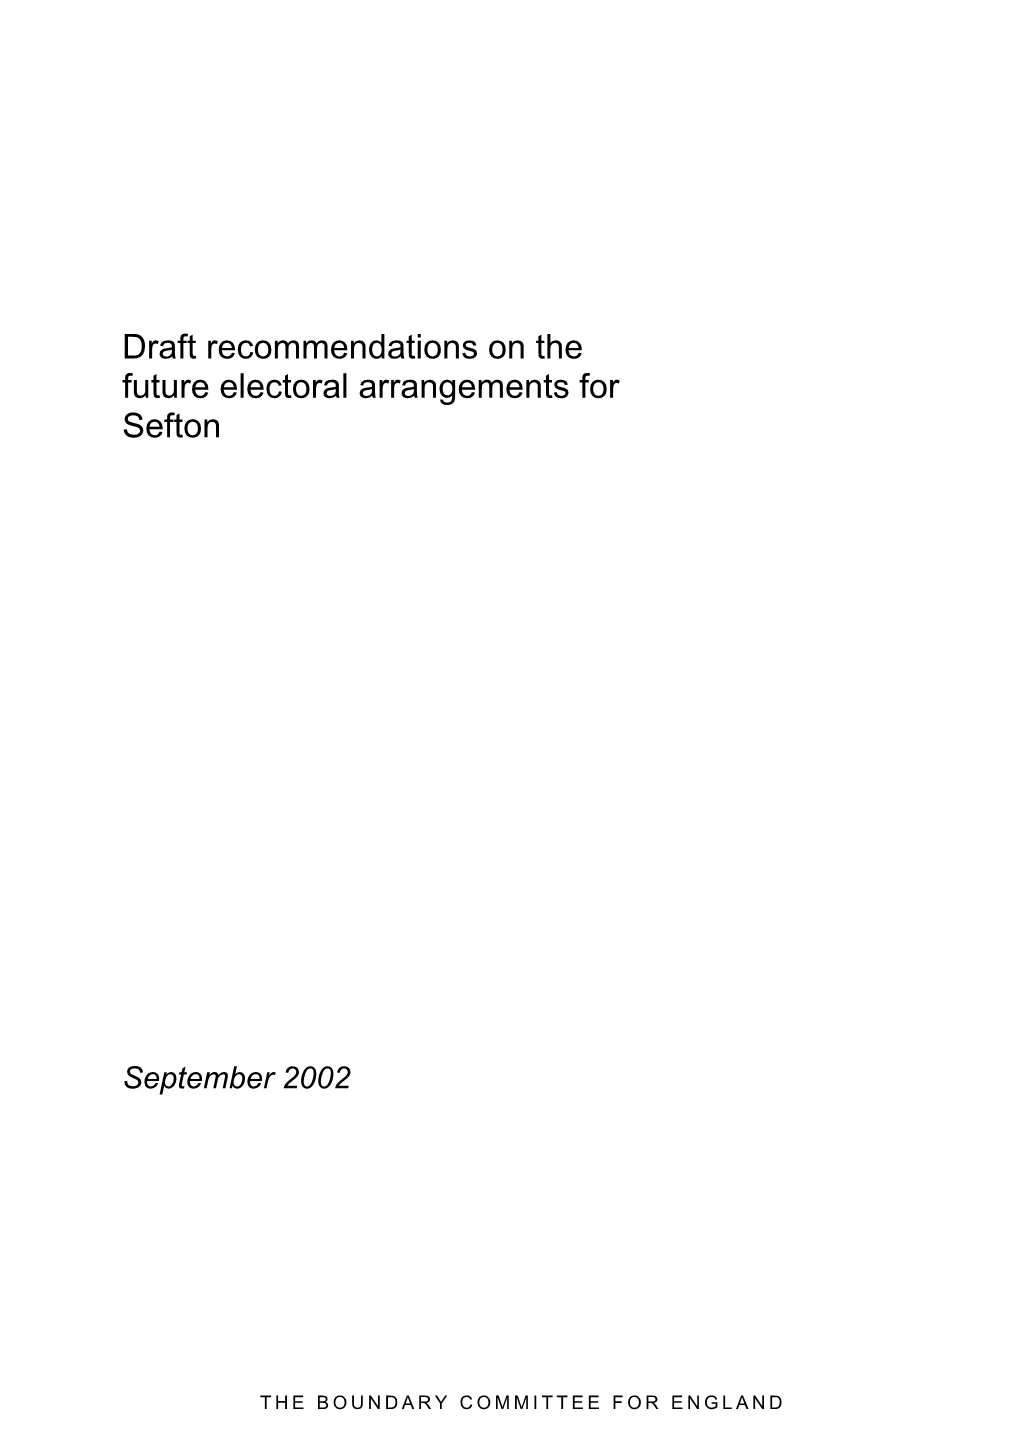 Draft Recommendations on the Future Electoral Arrangements for Sefton